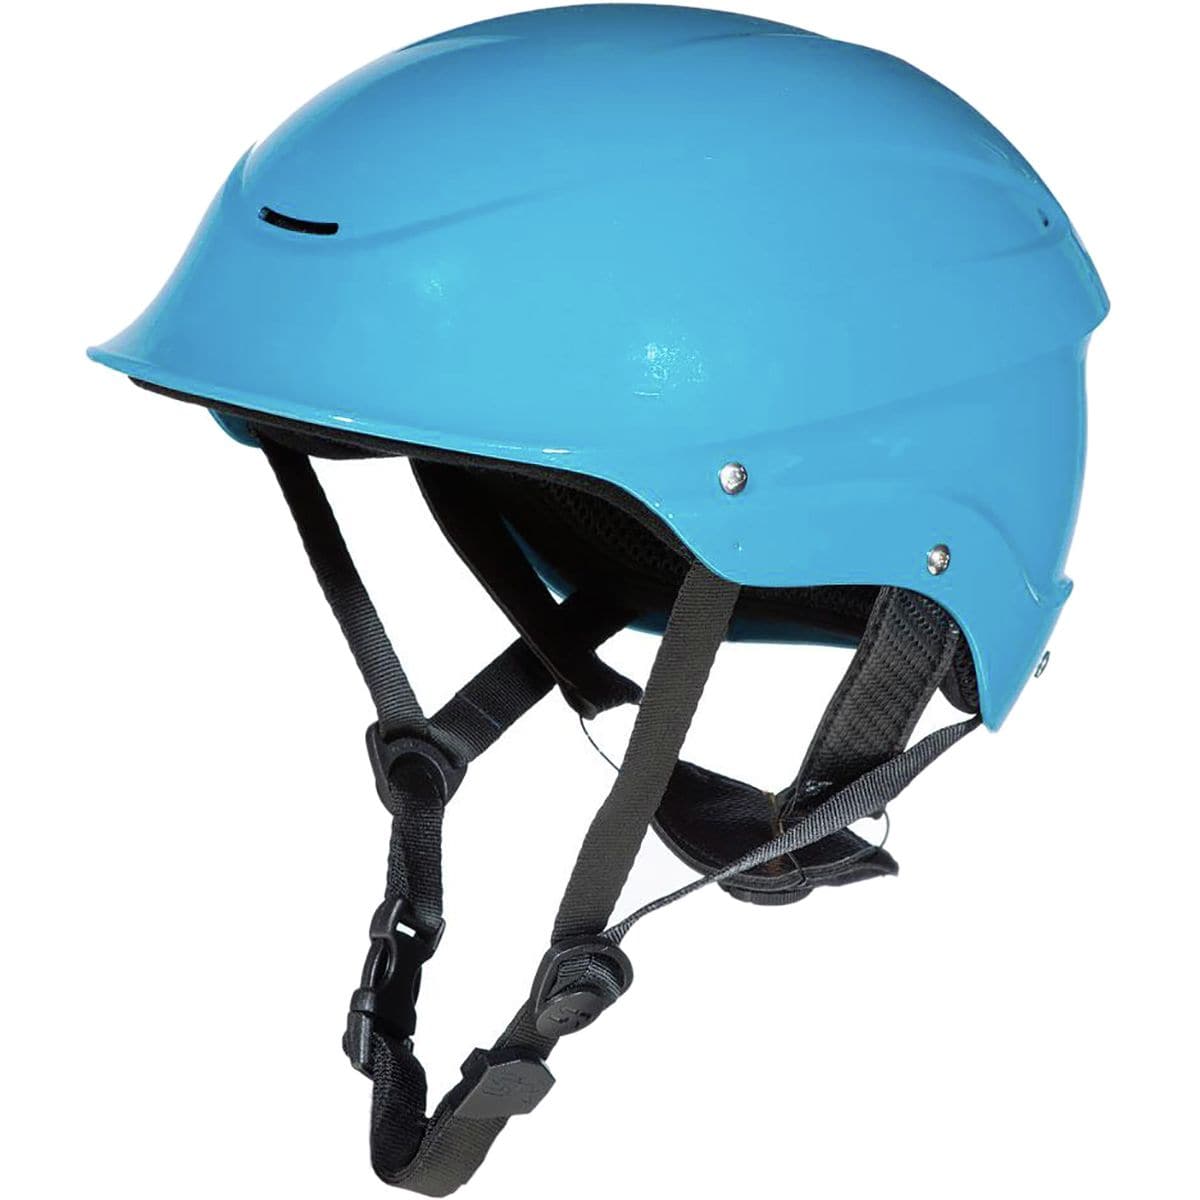 Featuring the Standard Halfcut Helmet helmet manufactured by Shred Ready shown here from a second angle.